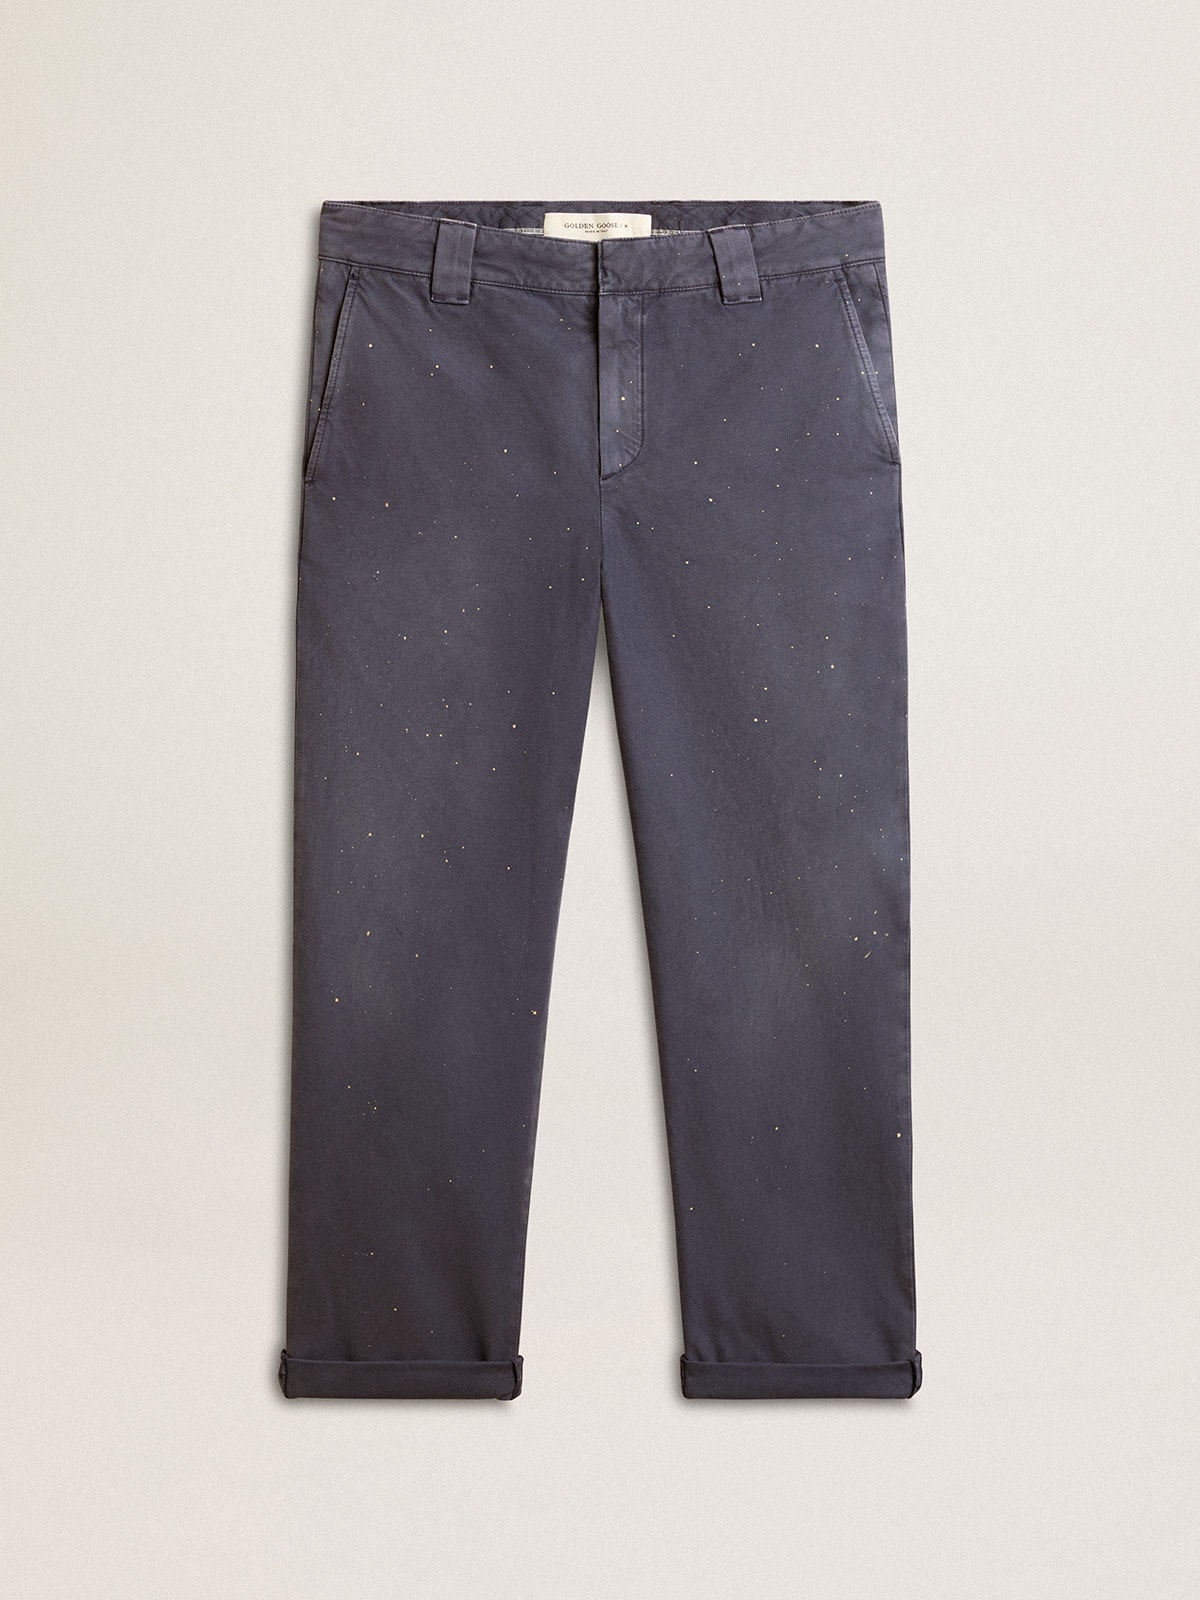 Mens trousers: pants and jeans for men | Golden Goose